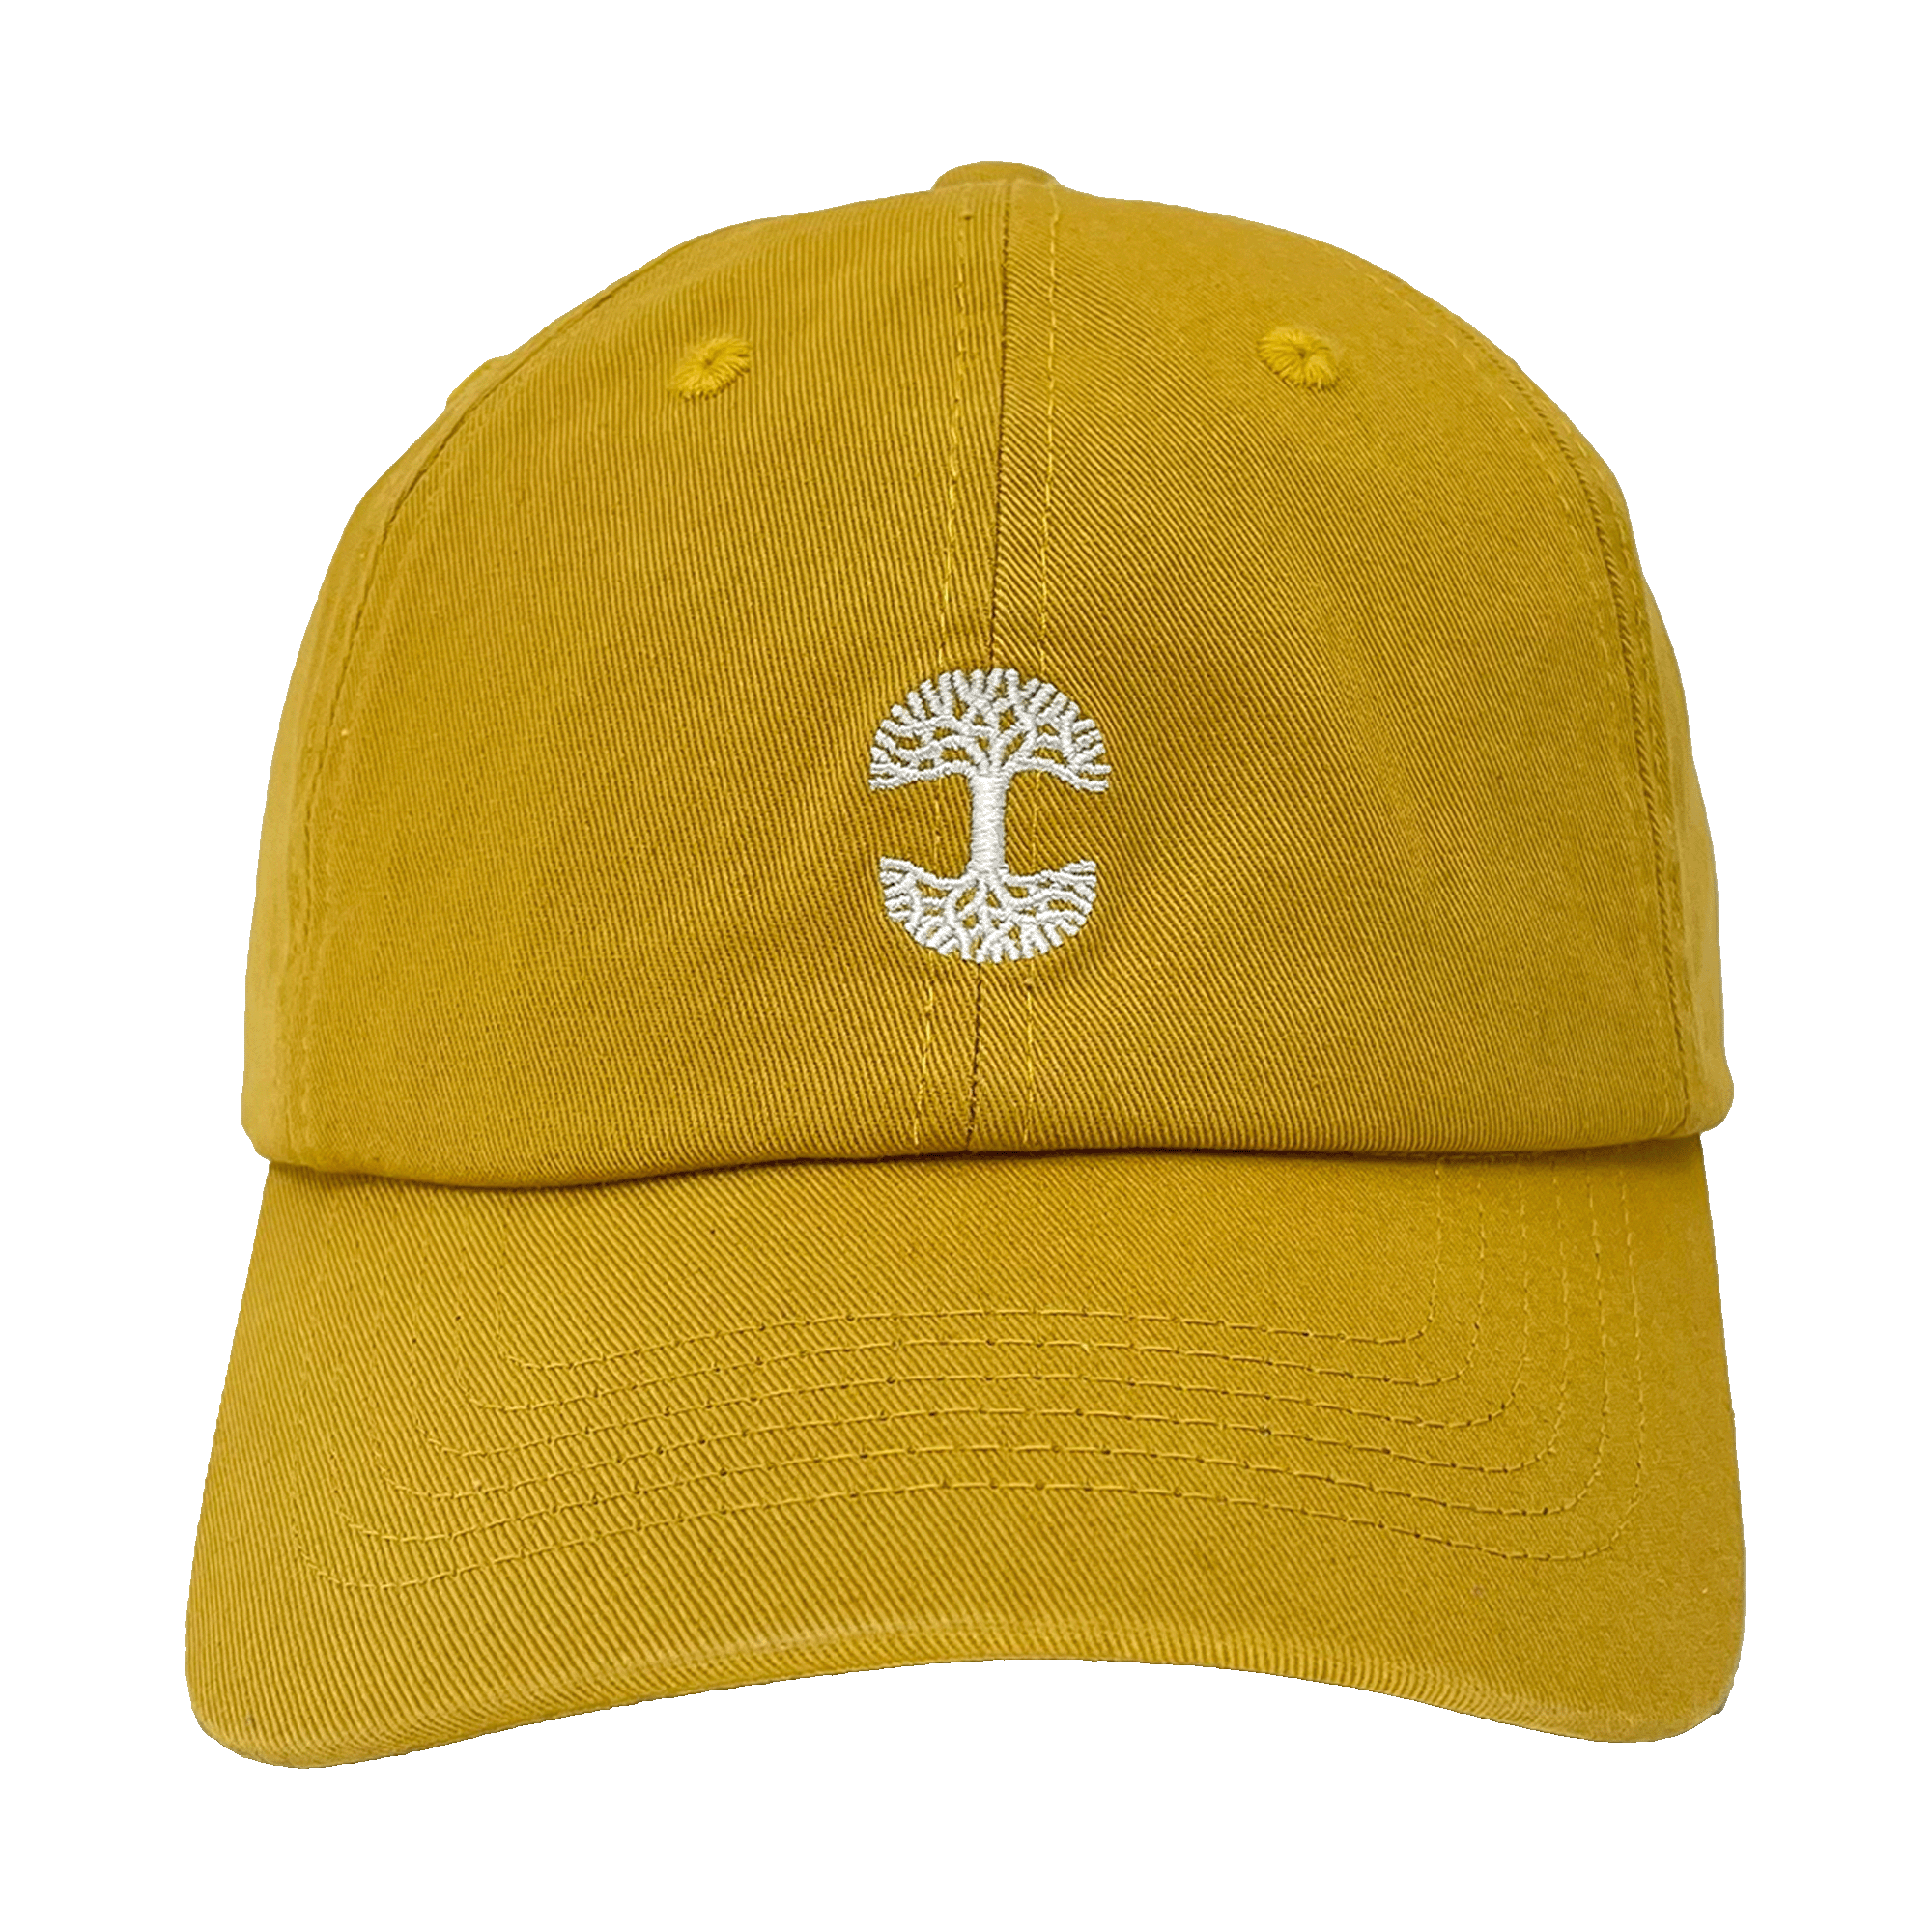 Front view of mustard yellow dad cap with micro-sized white embroidered Oaklandish tree logo on the crown.